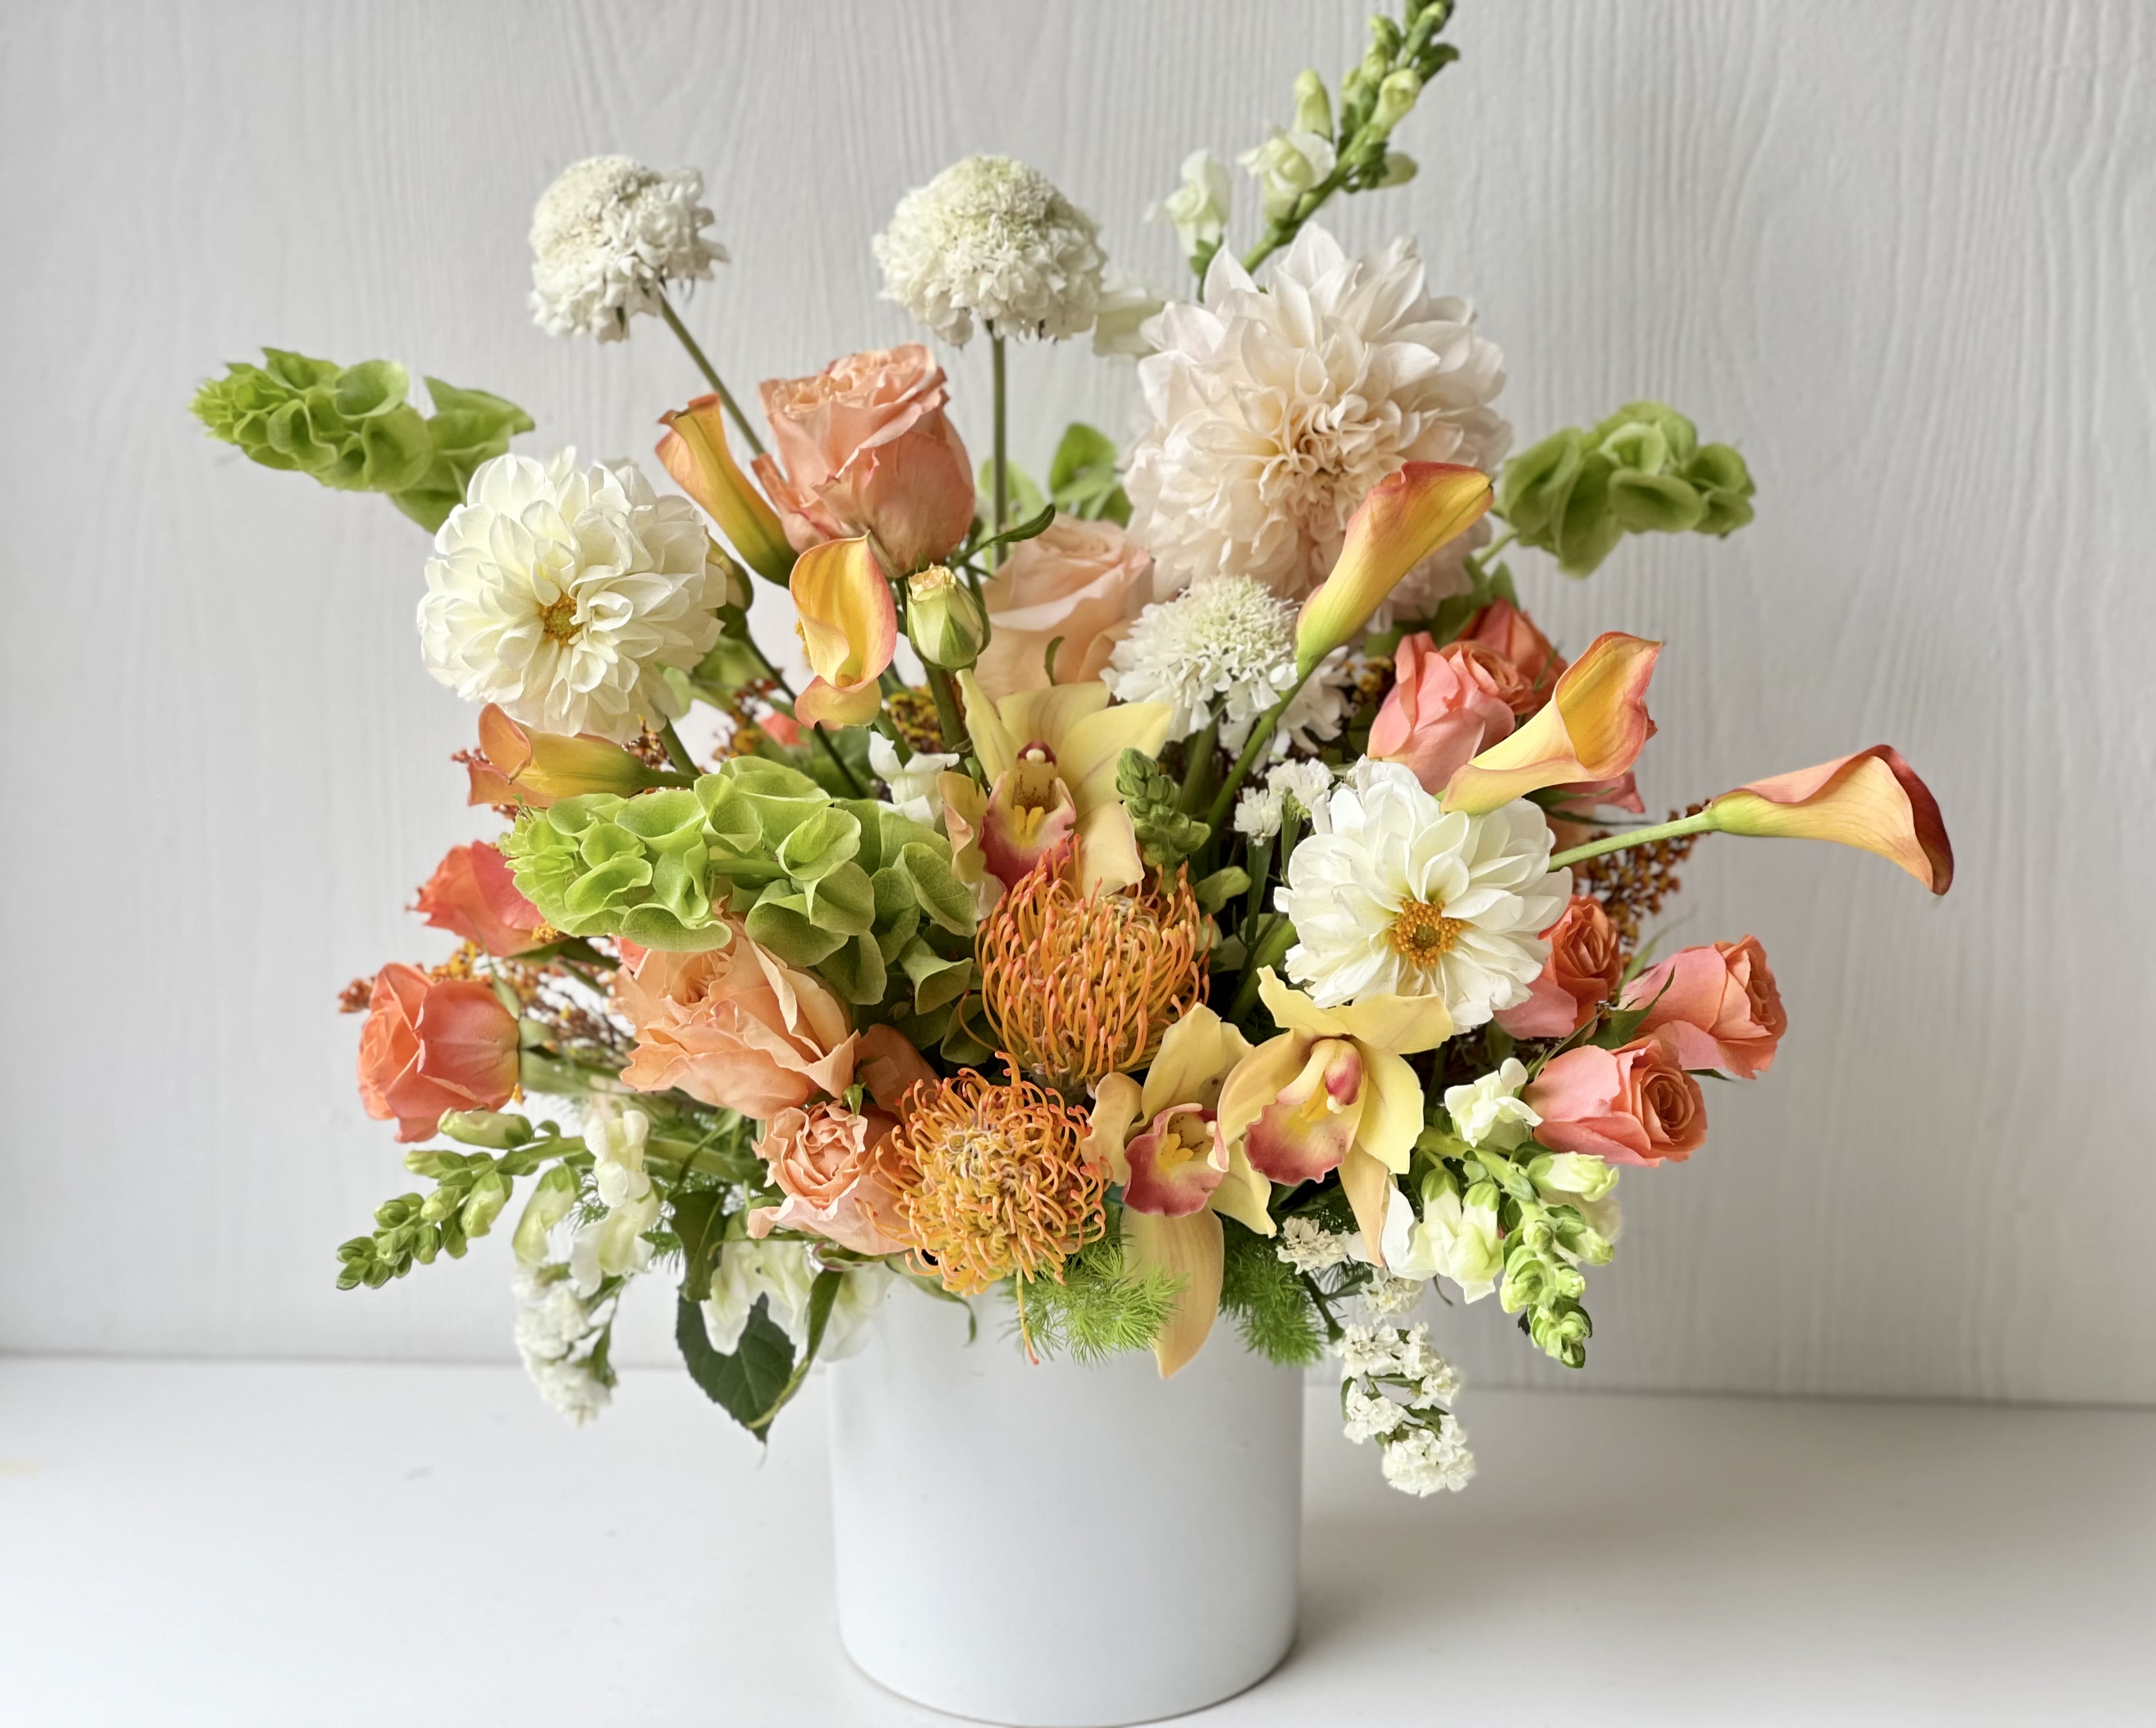 EC97 Best Mom Ever - This arrangement features energetic and joyful flowers that's perfect for brightening up your mother's space! This stunning bouquet features a delightful mix of peach, white, green and orange flowers such as roses, dahlias, cymbidium orchids, snapdragons, bells of ireland, pincushions, spray roses and calla lilies with fresh foliage. The floral arrangement is a perfect choice for any special occasion, from Mother's Day, birthdays to thank-you gifts. 